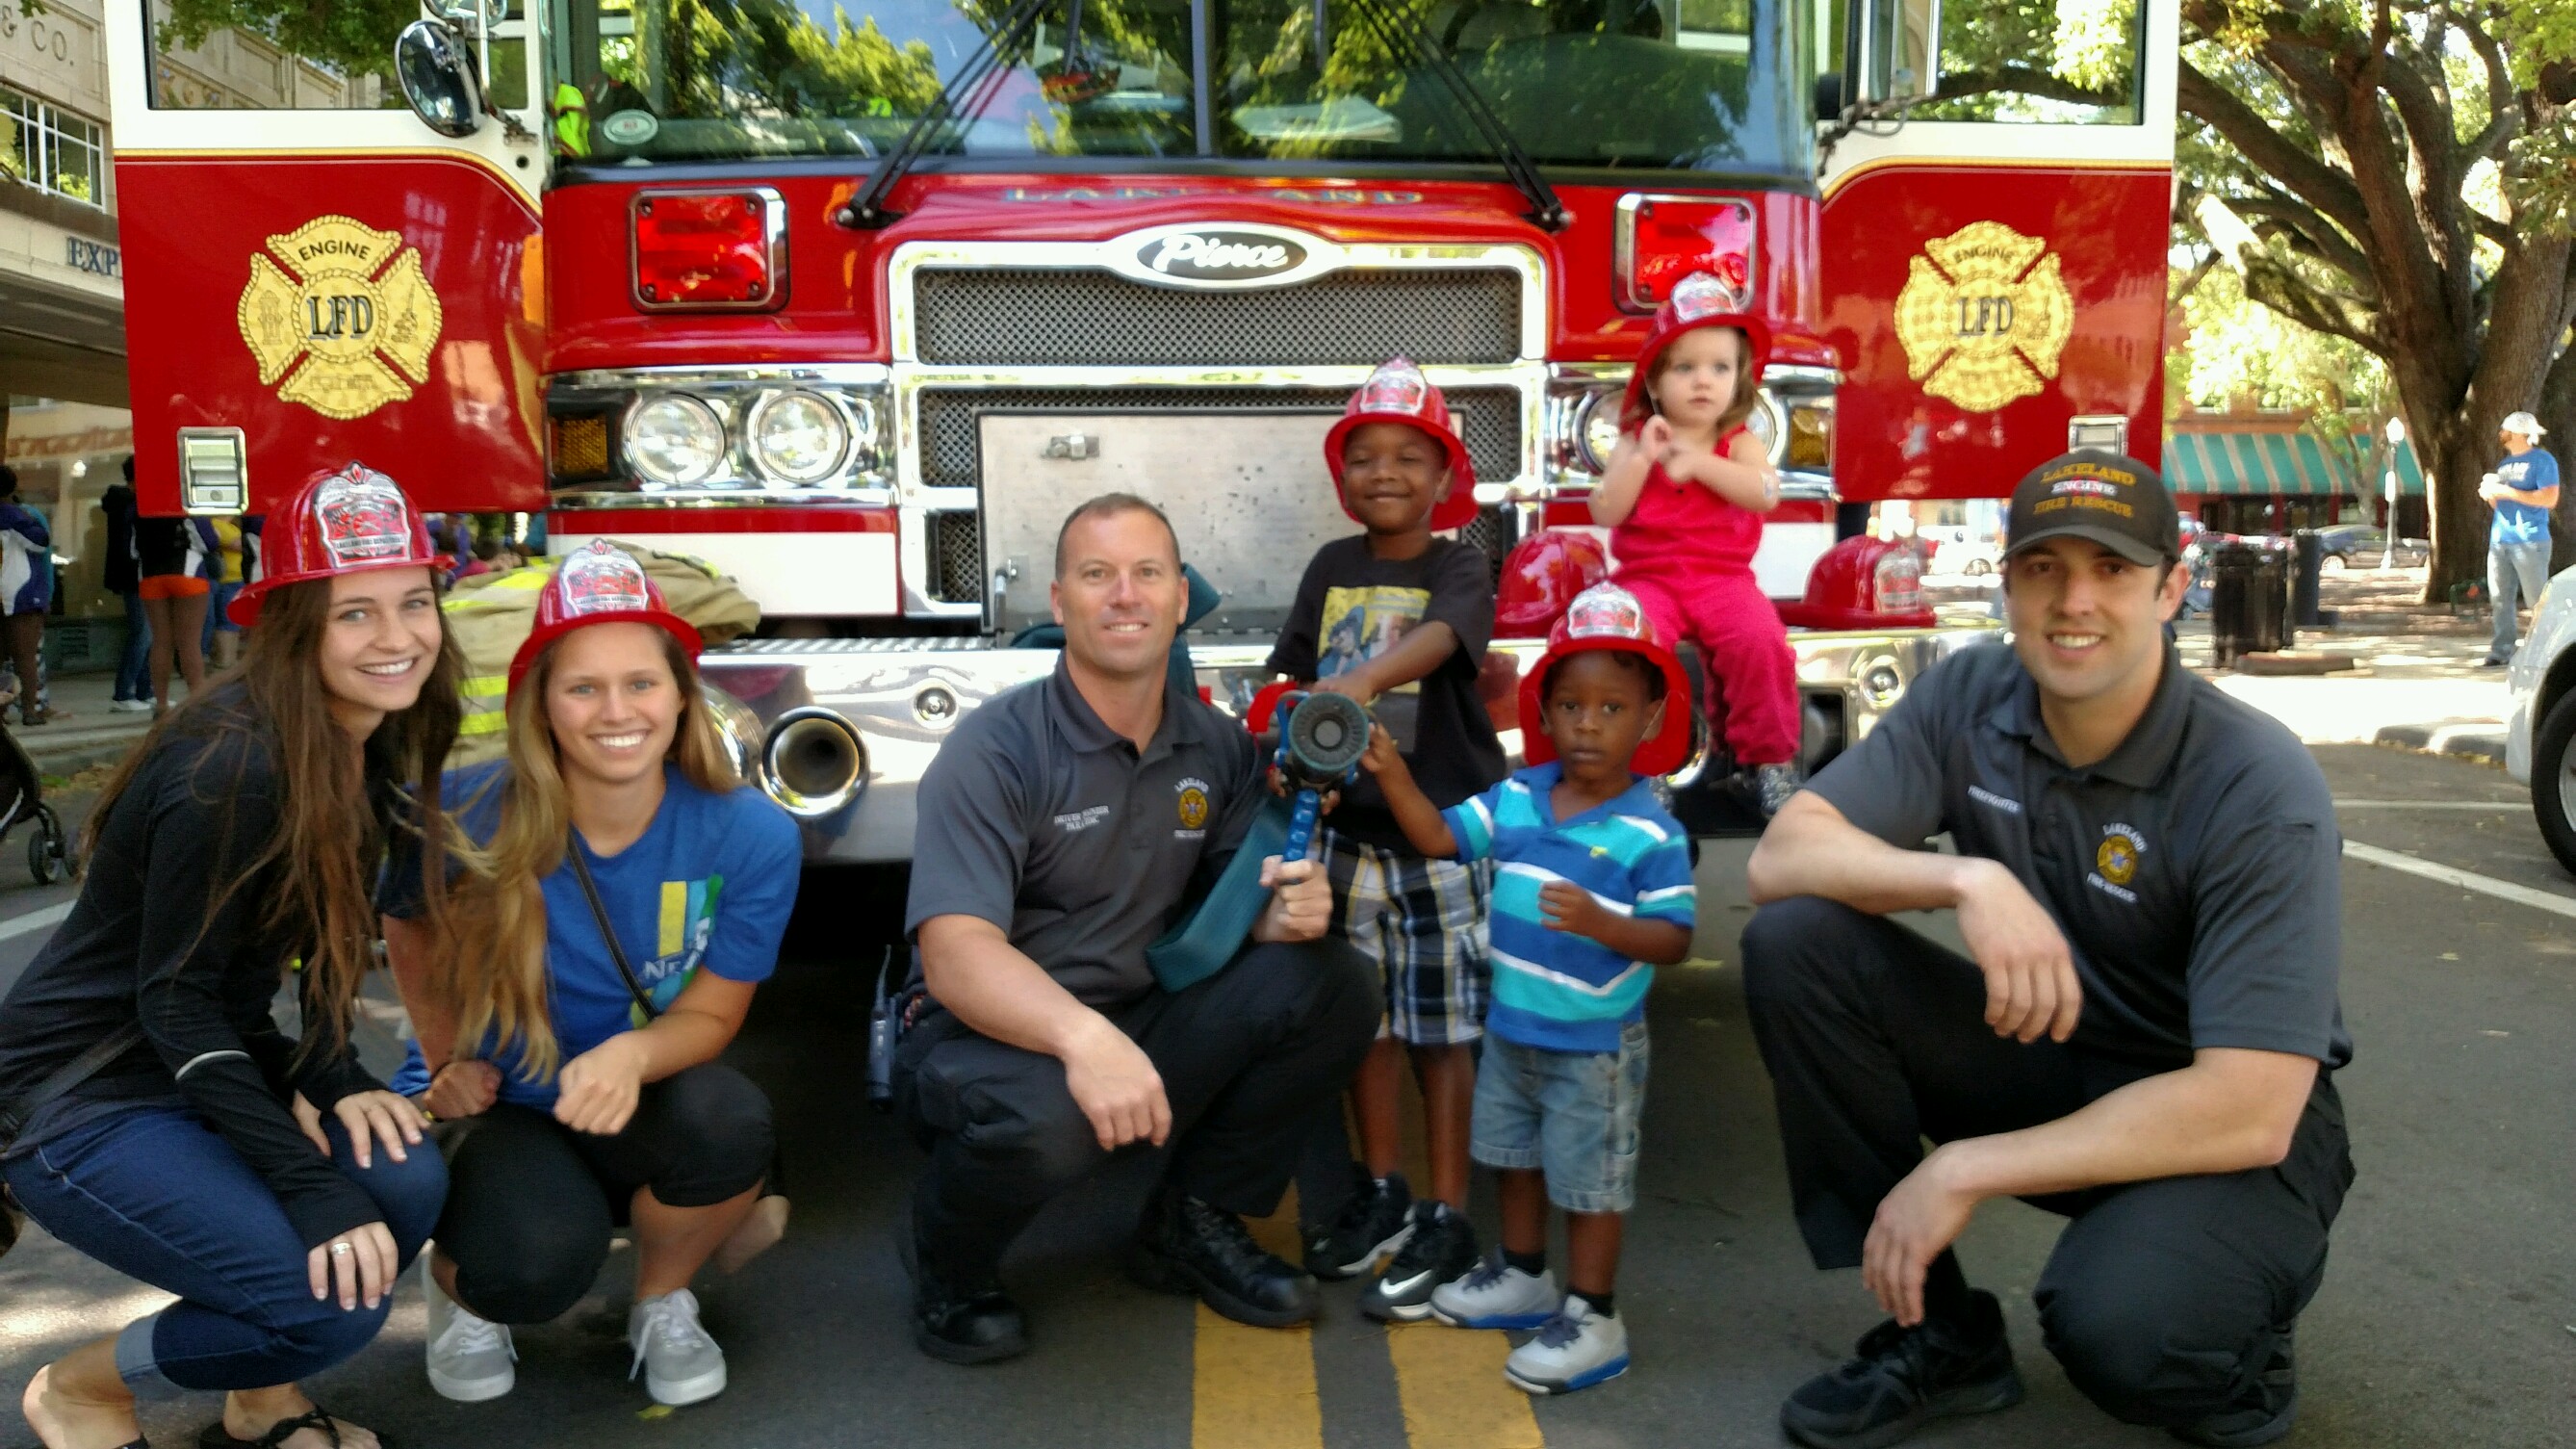 Firefighters at a Community Meet and Greet Event